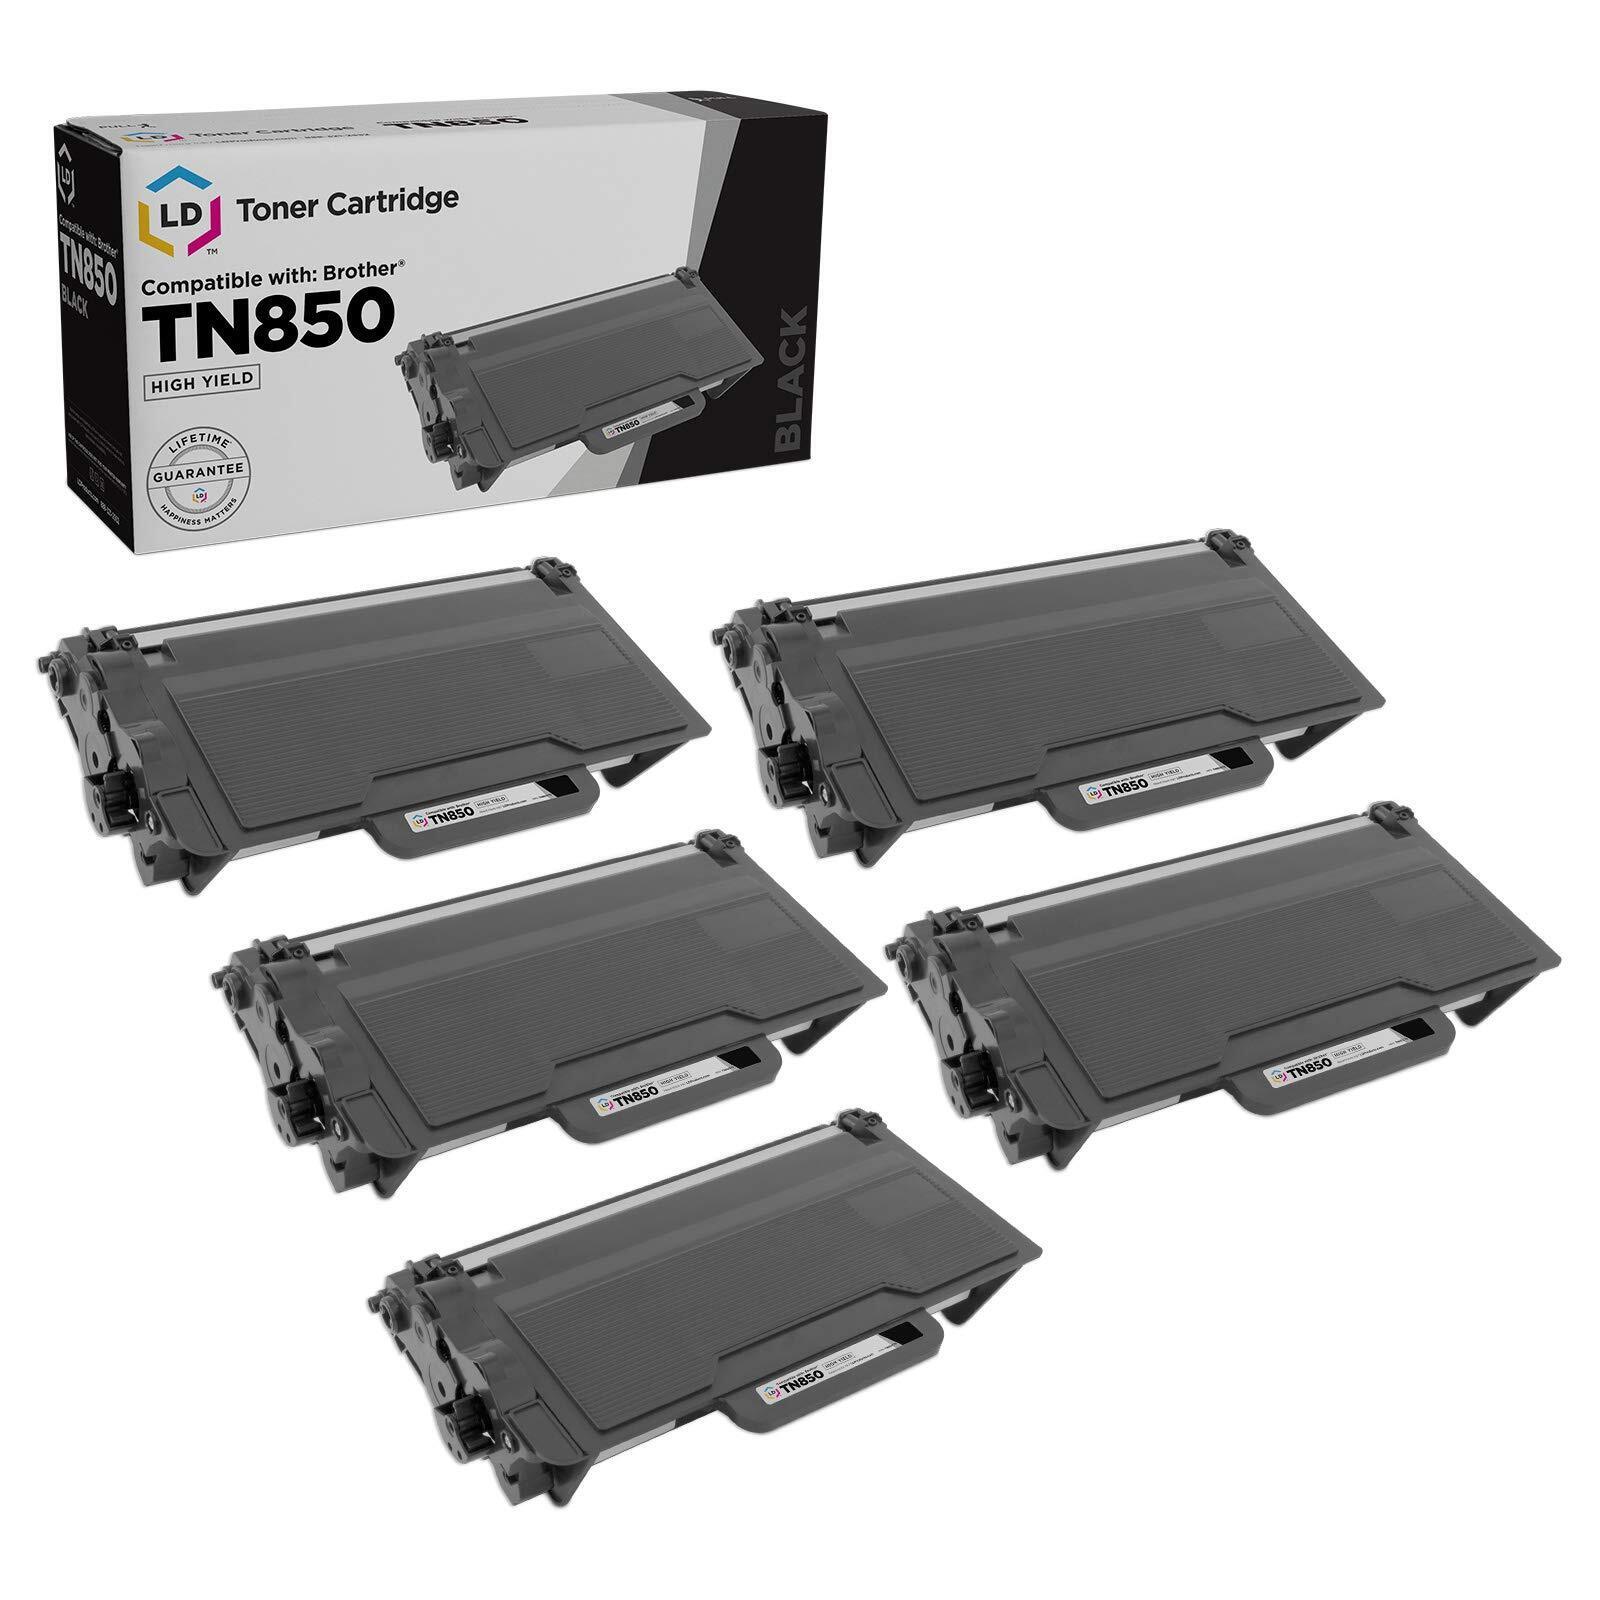 LD Compatible TN580 5PK High Yield Black Toner for Brother DCP-L5500DN DCP-L5600